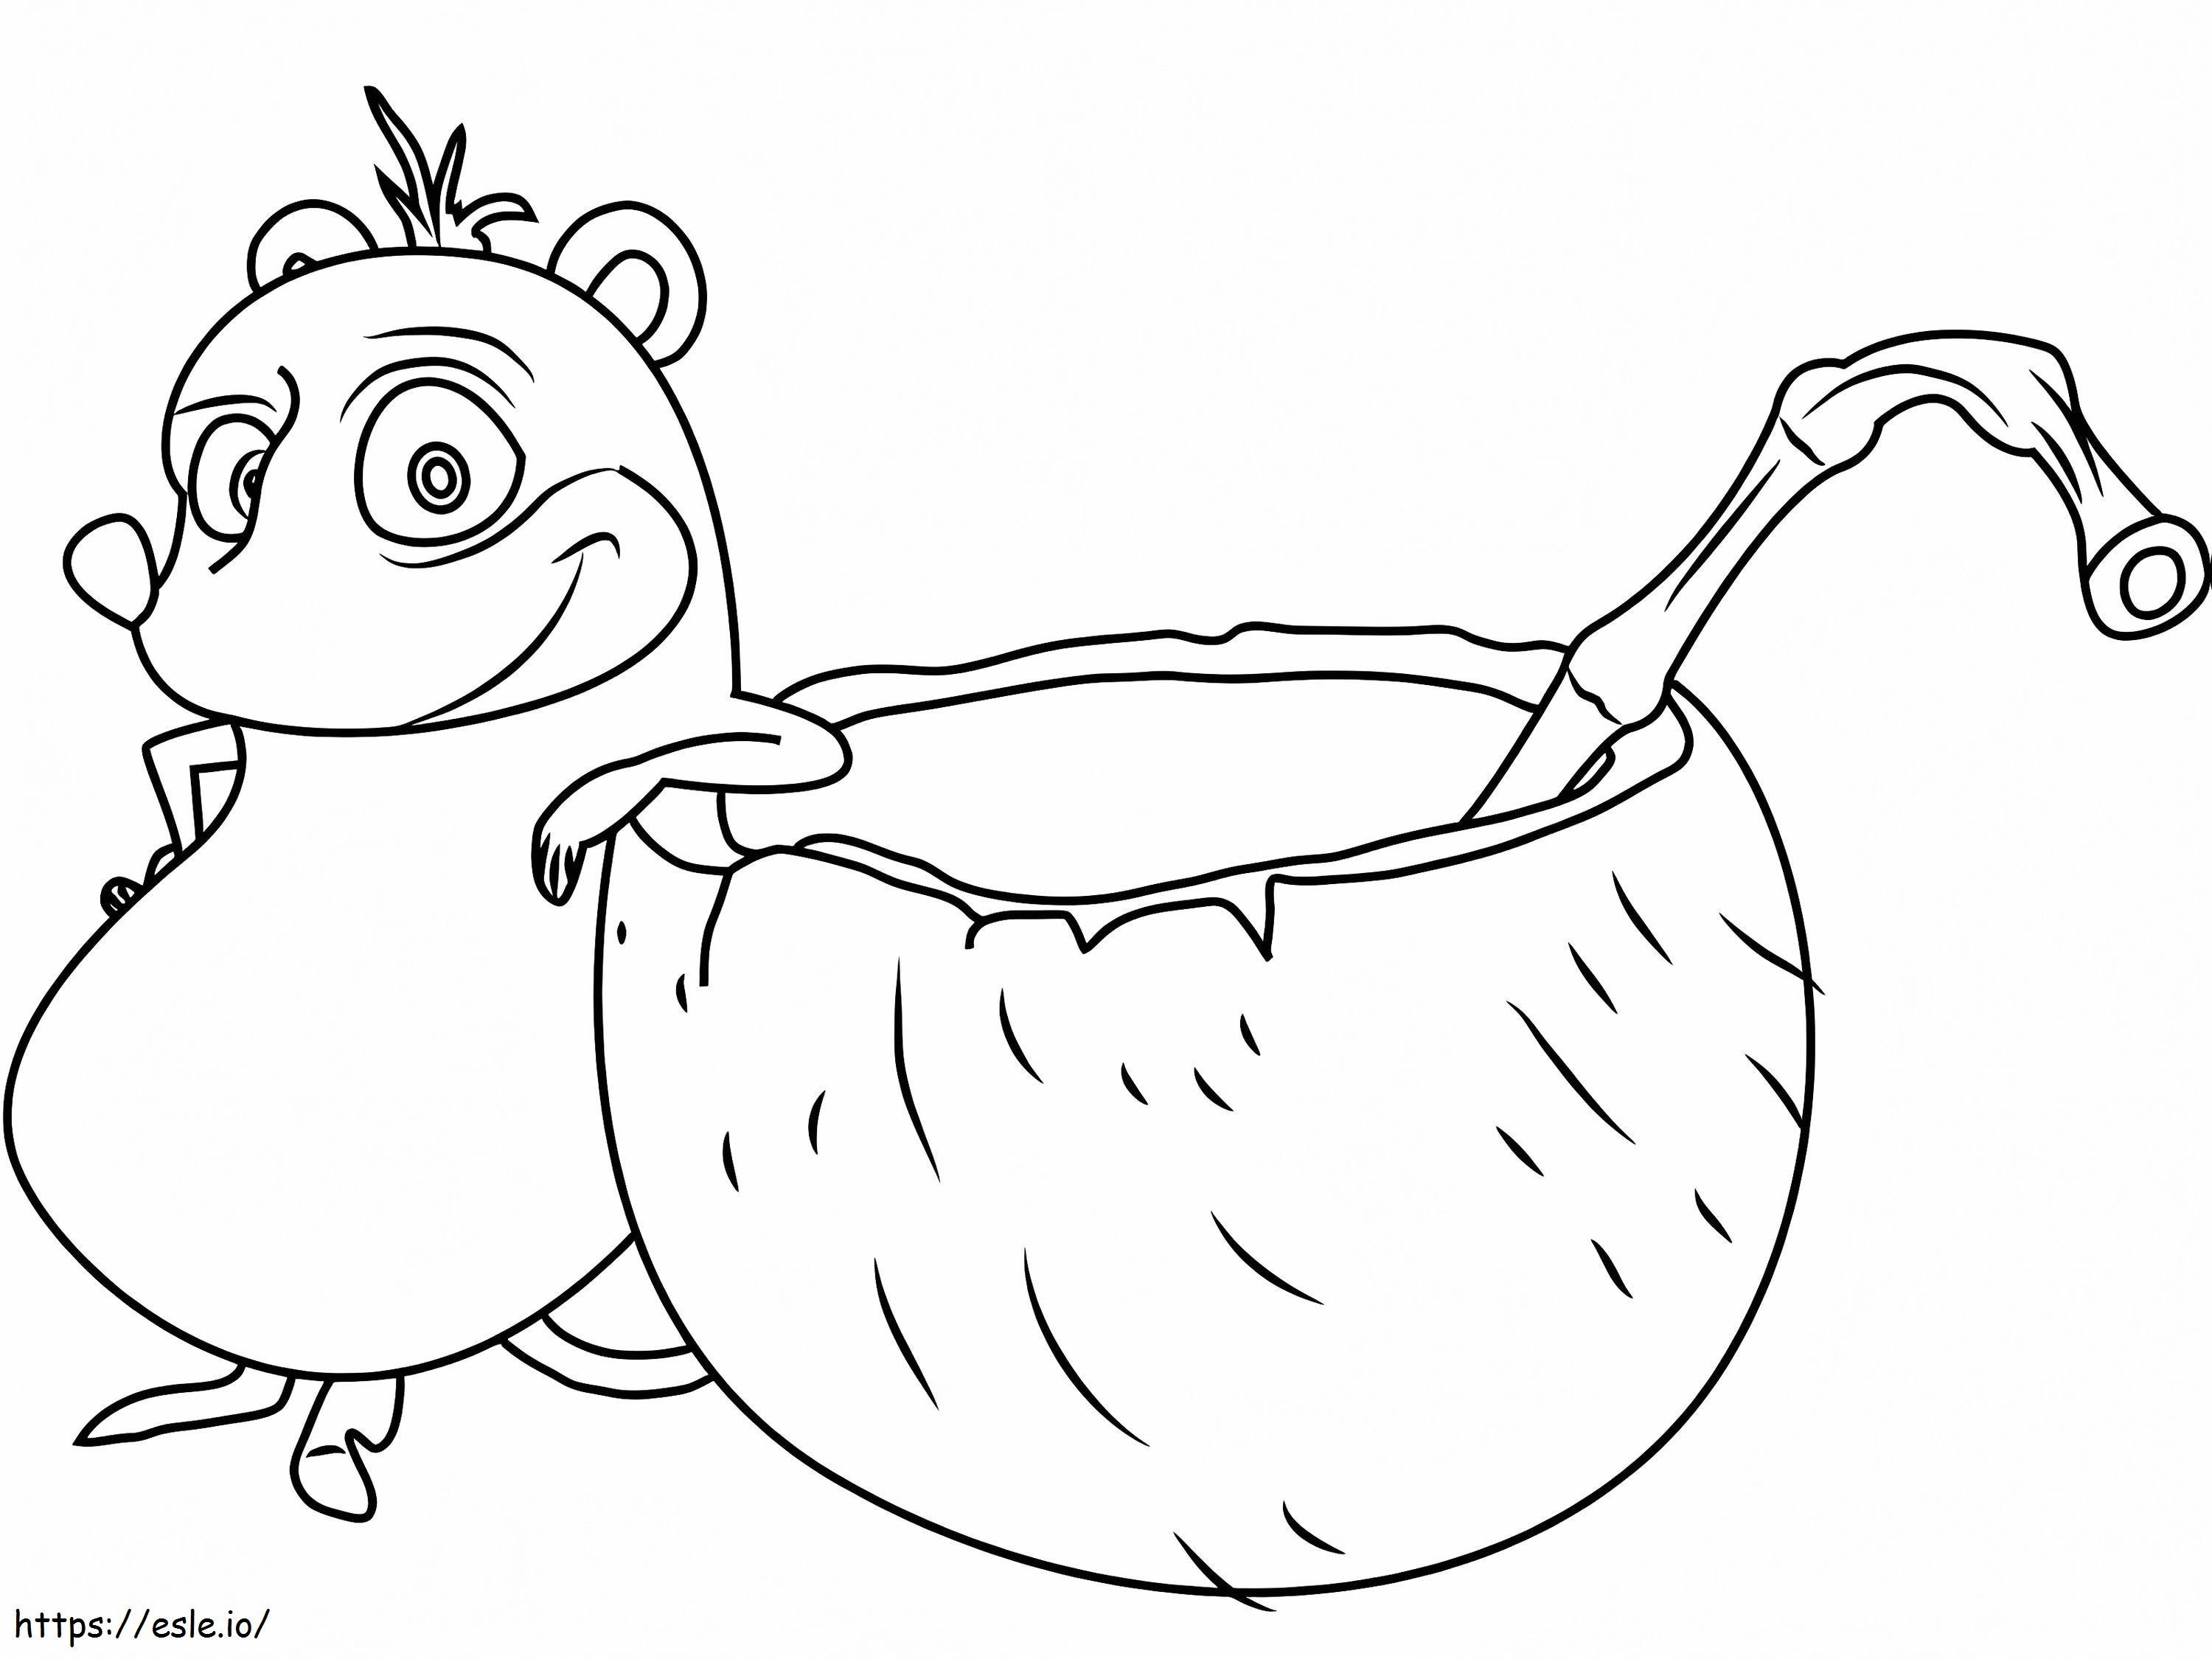 Morton From Horton Hears A Who coloring page